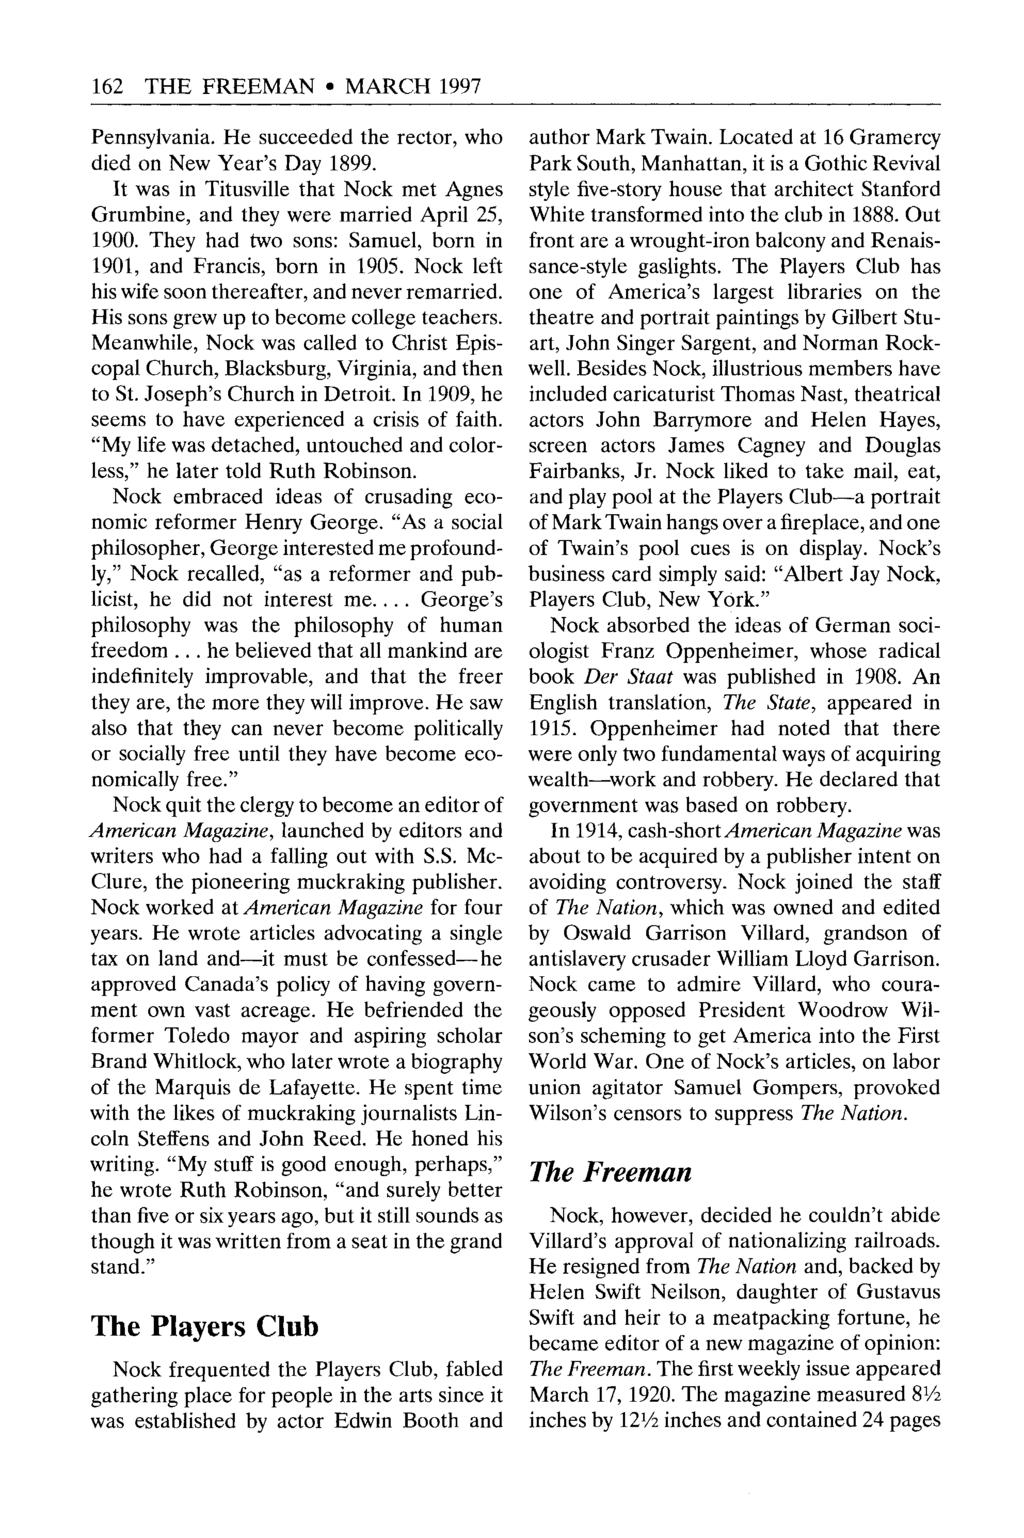 162 THE FREEMAN MARCH 1997 Pennsylvania. He succeeded the rector, who died on New Year's Day 1899. It was in Titusville that Nock met Agnes Grumbine, and they were married April 25, 1900.